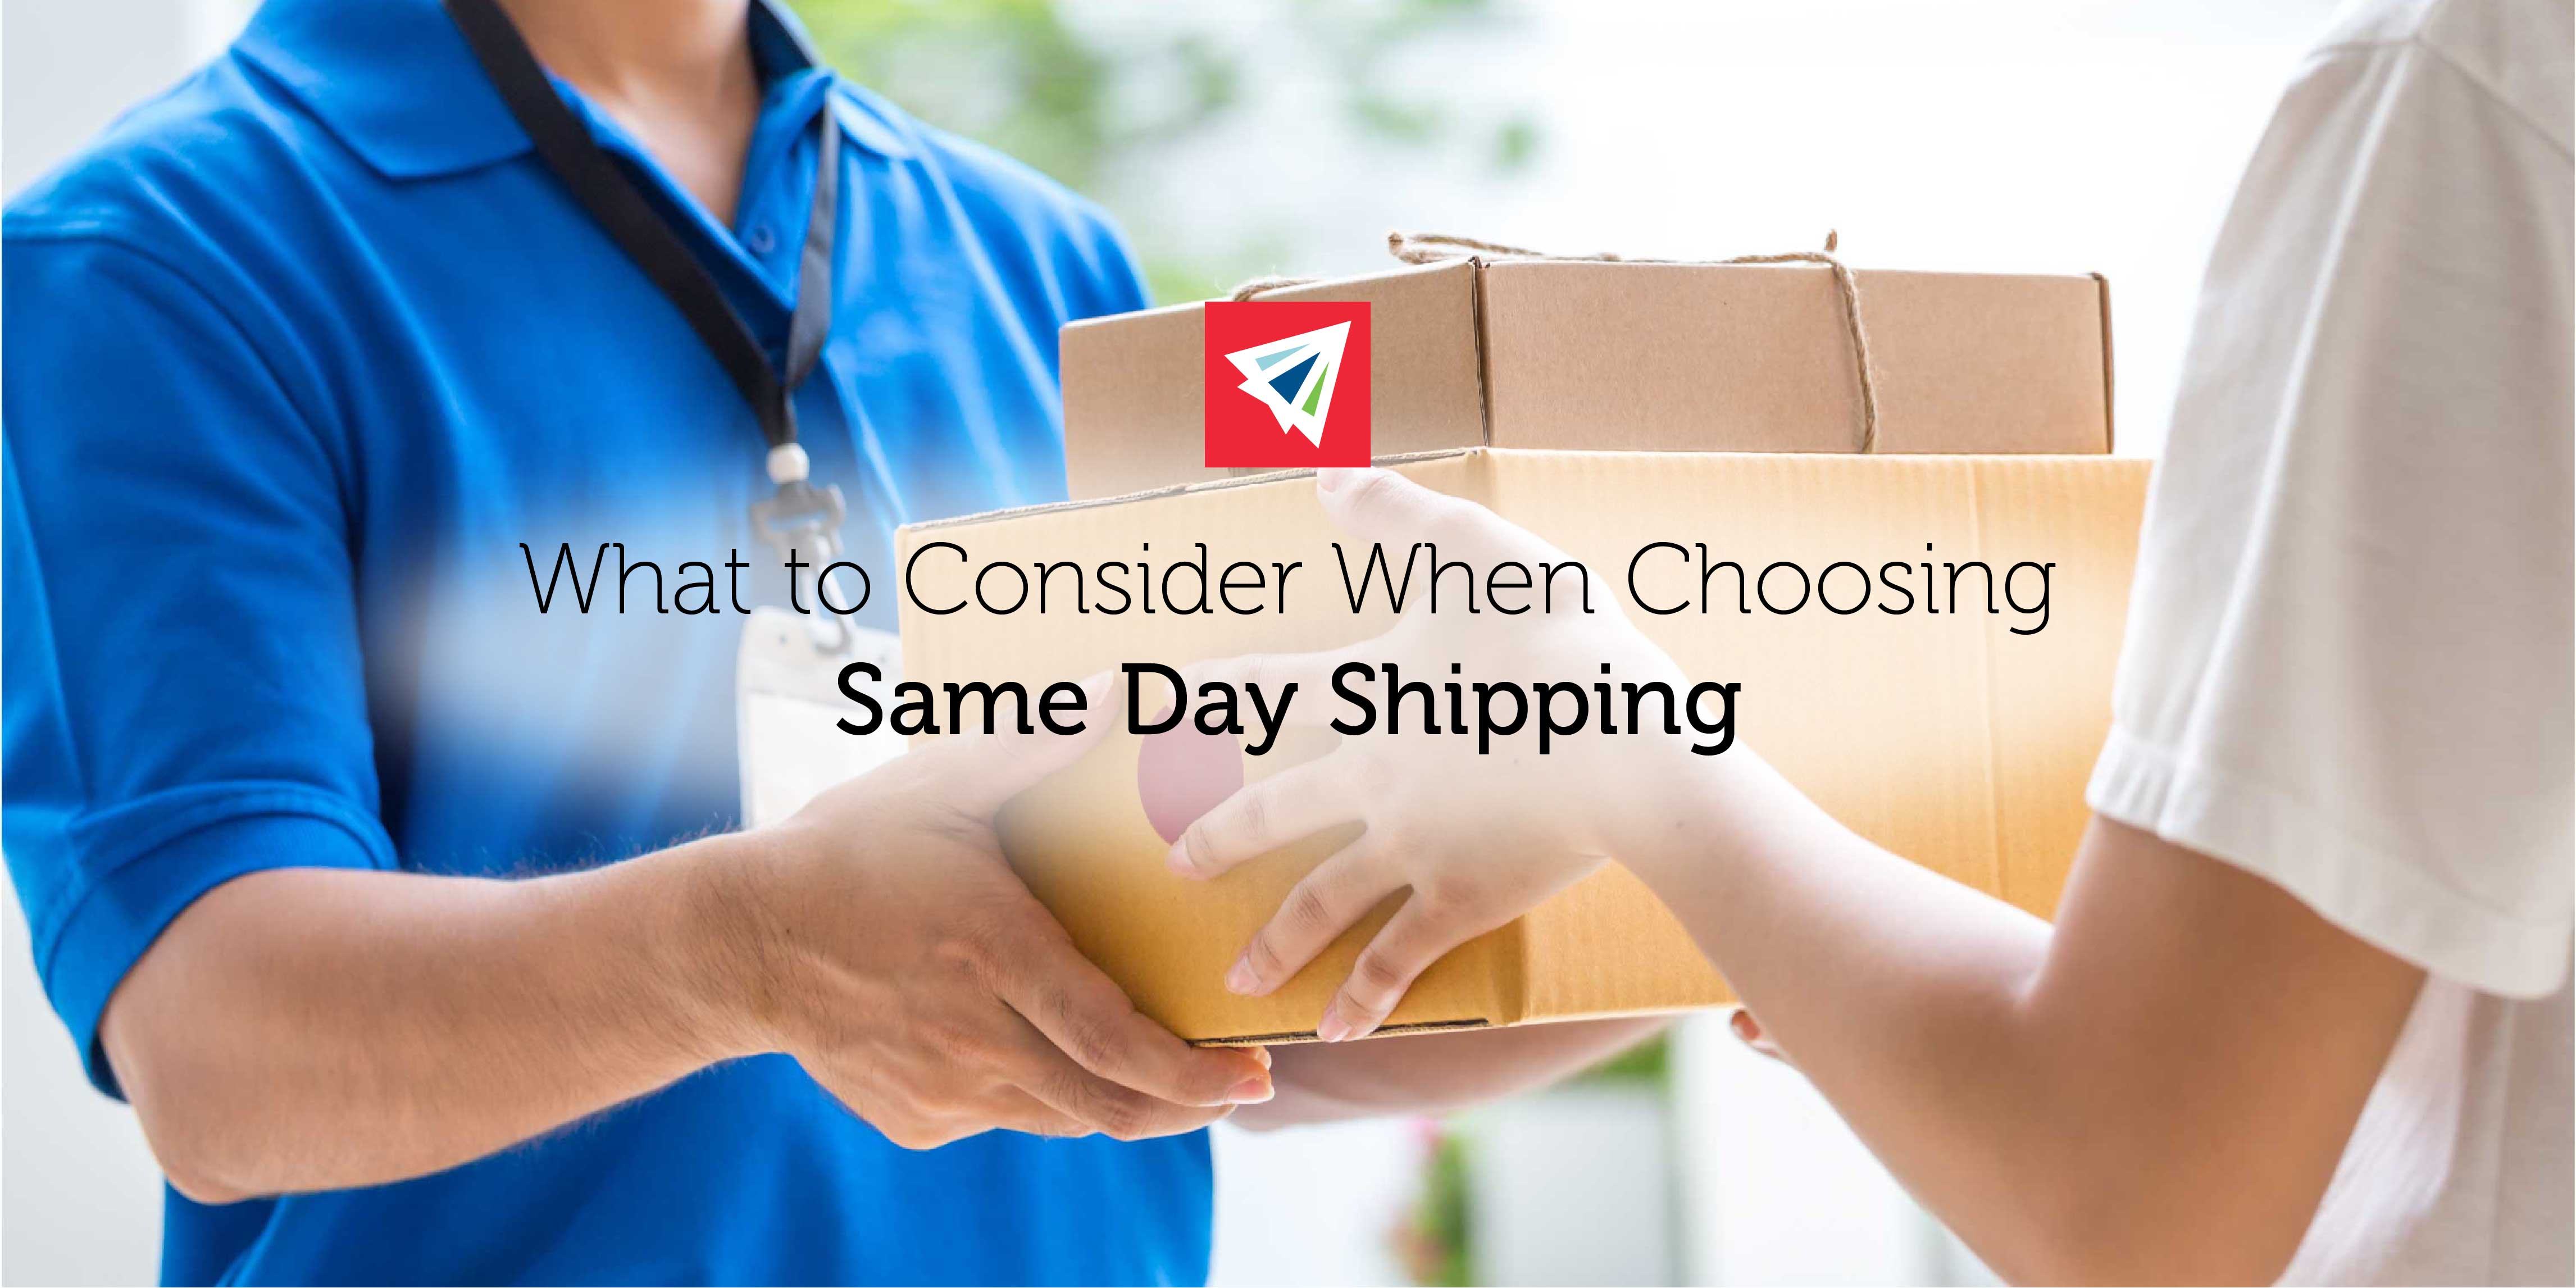 Same Day Shipping What to Consider When Choosing This